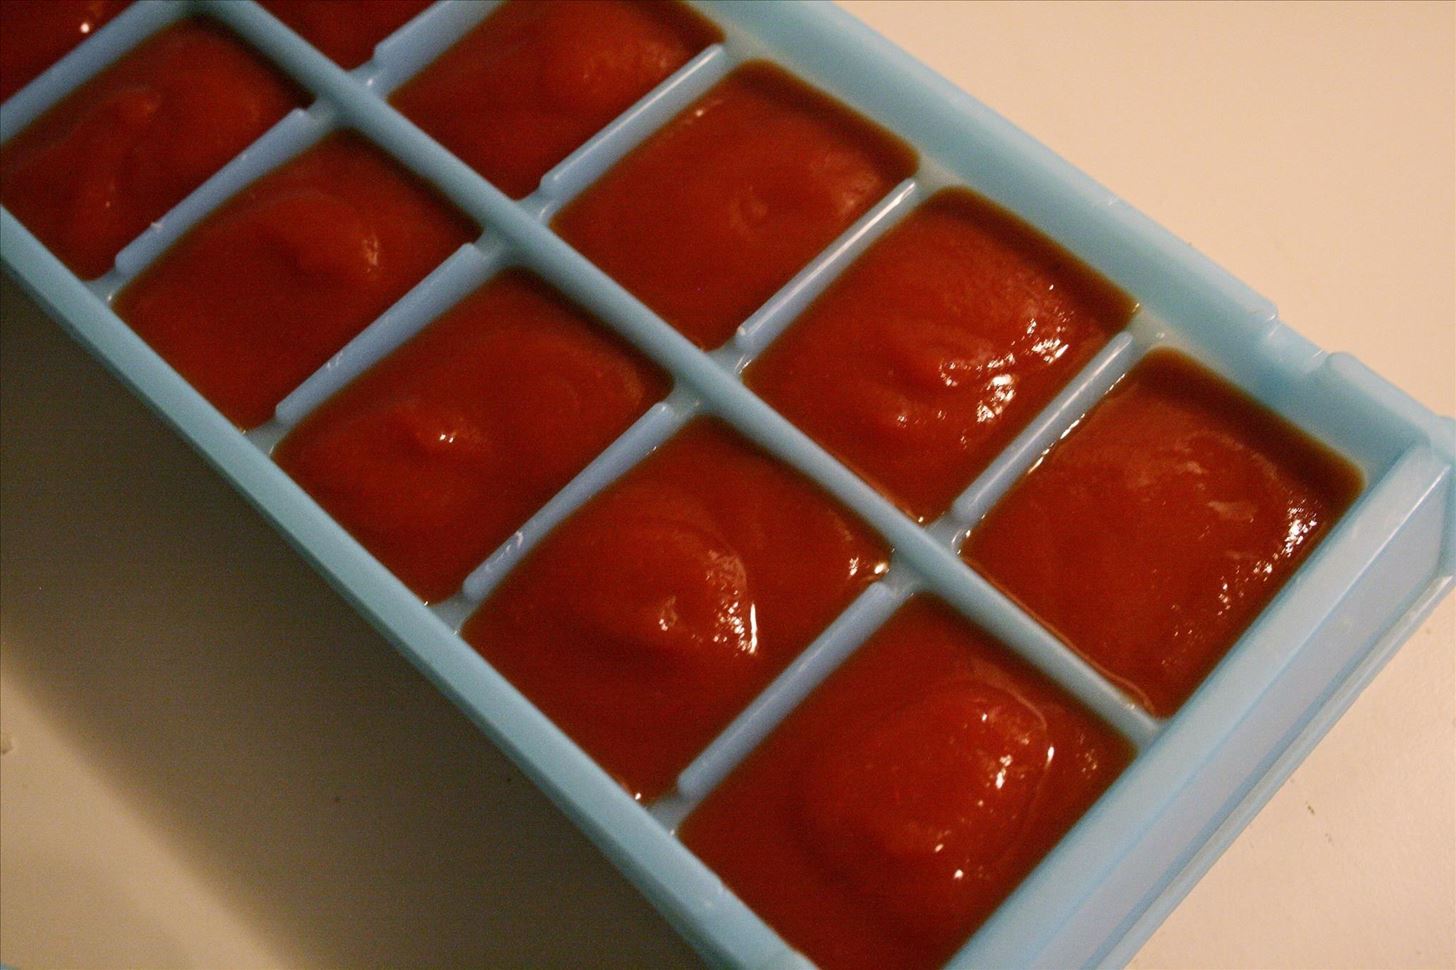 10 Thrifty, Time-Saving Ice Cube Tray Food Hacks